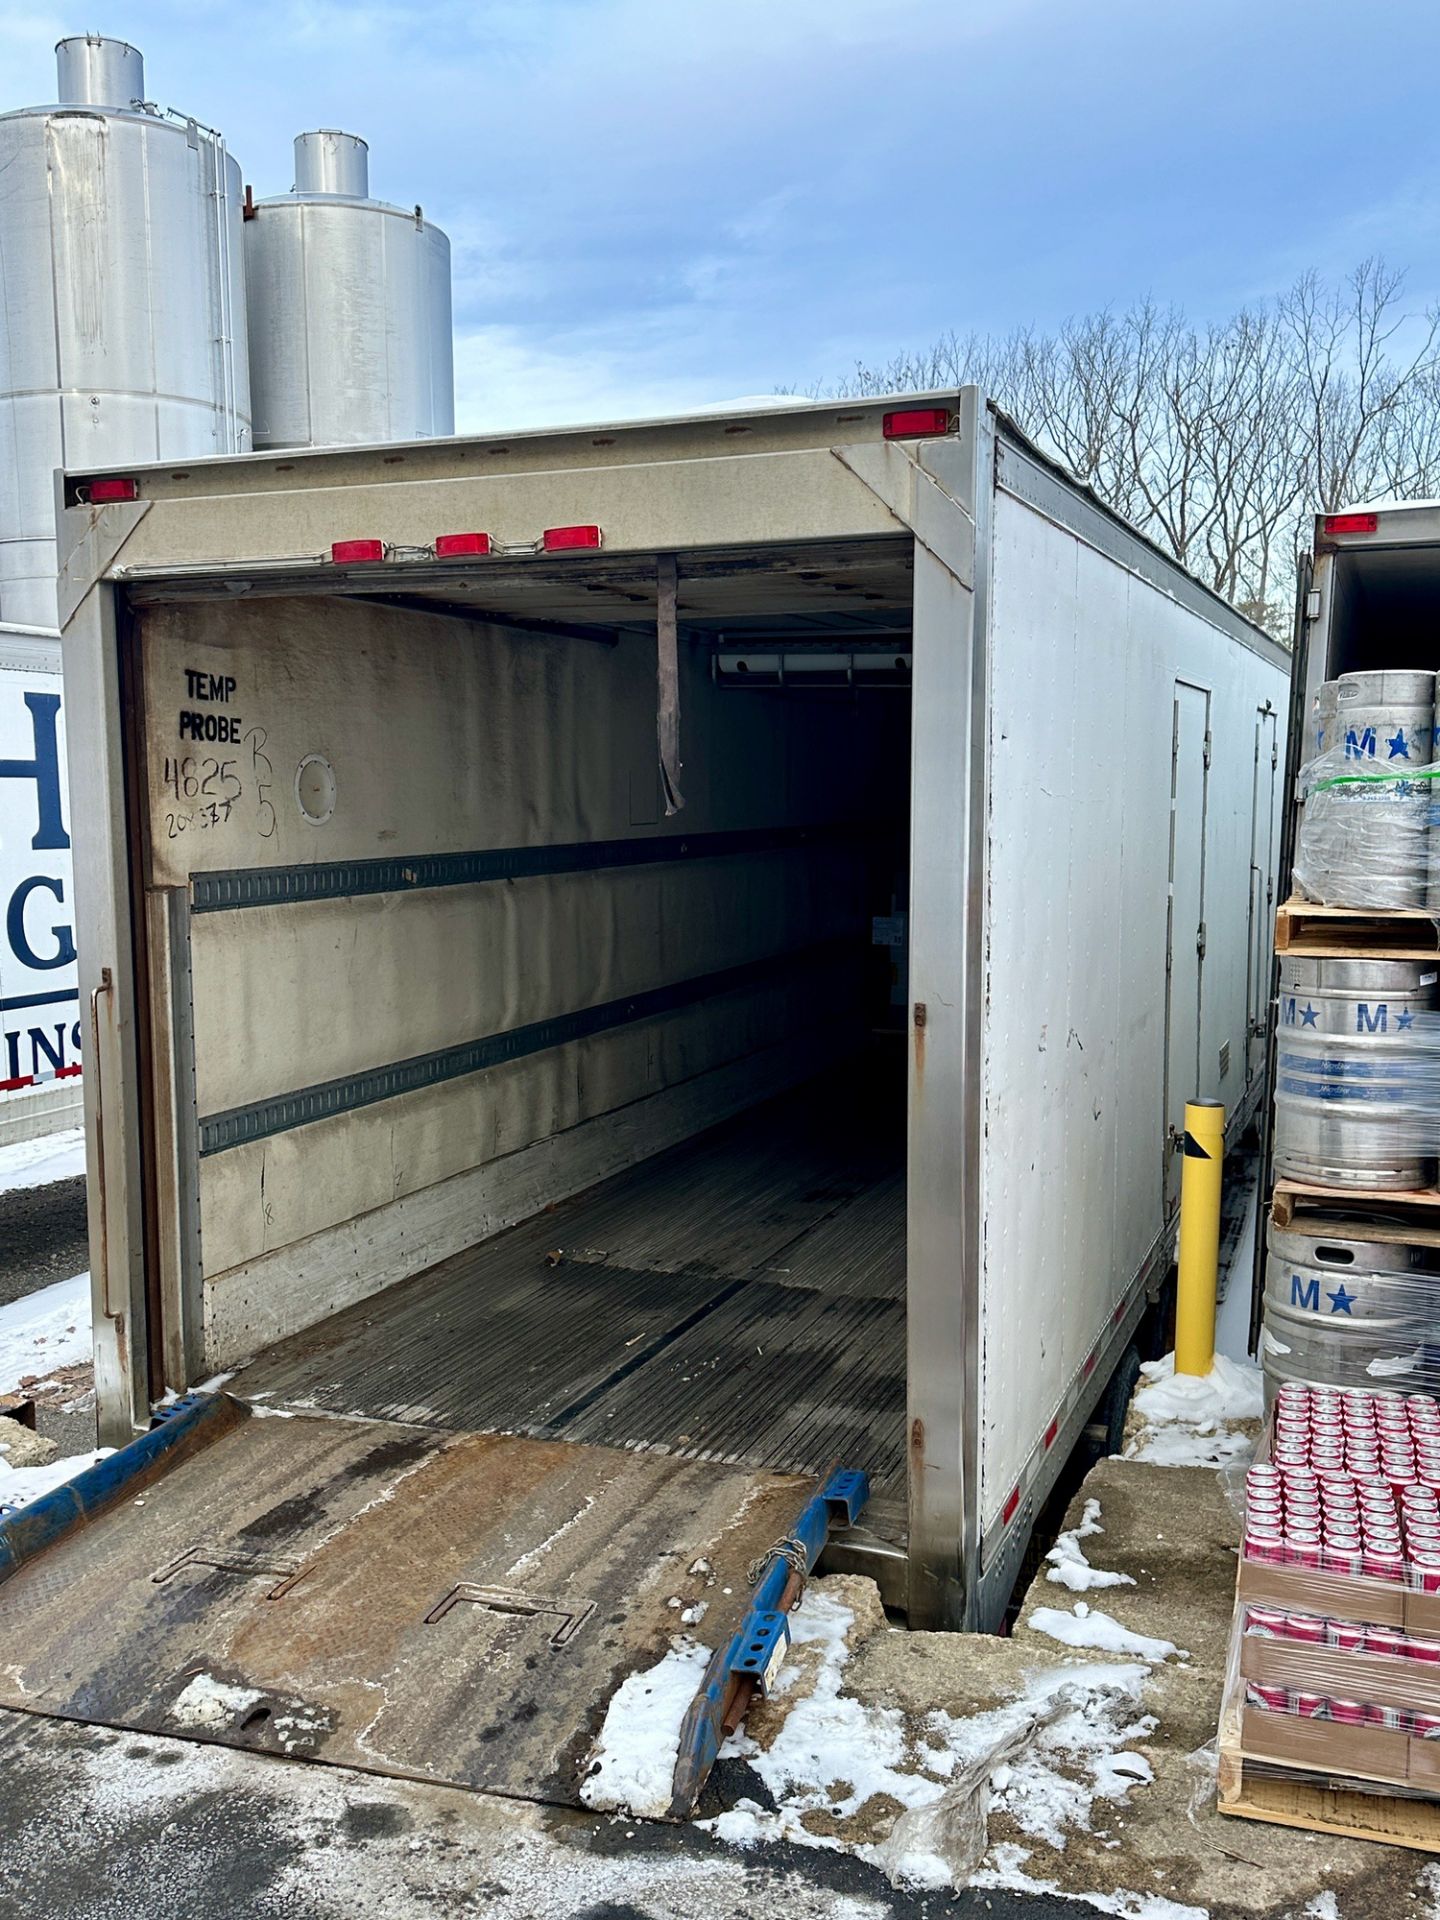 45' Semi Trailer with Thermo King Whisper Reefer Unit - 13'6" Height (Contents No | Rig Fee By Buyer - Image 6 of 7